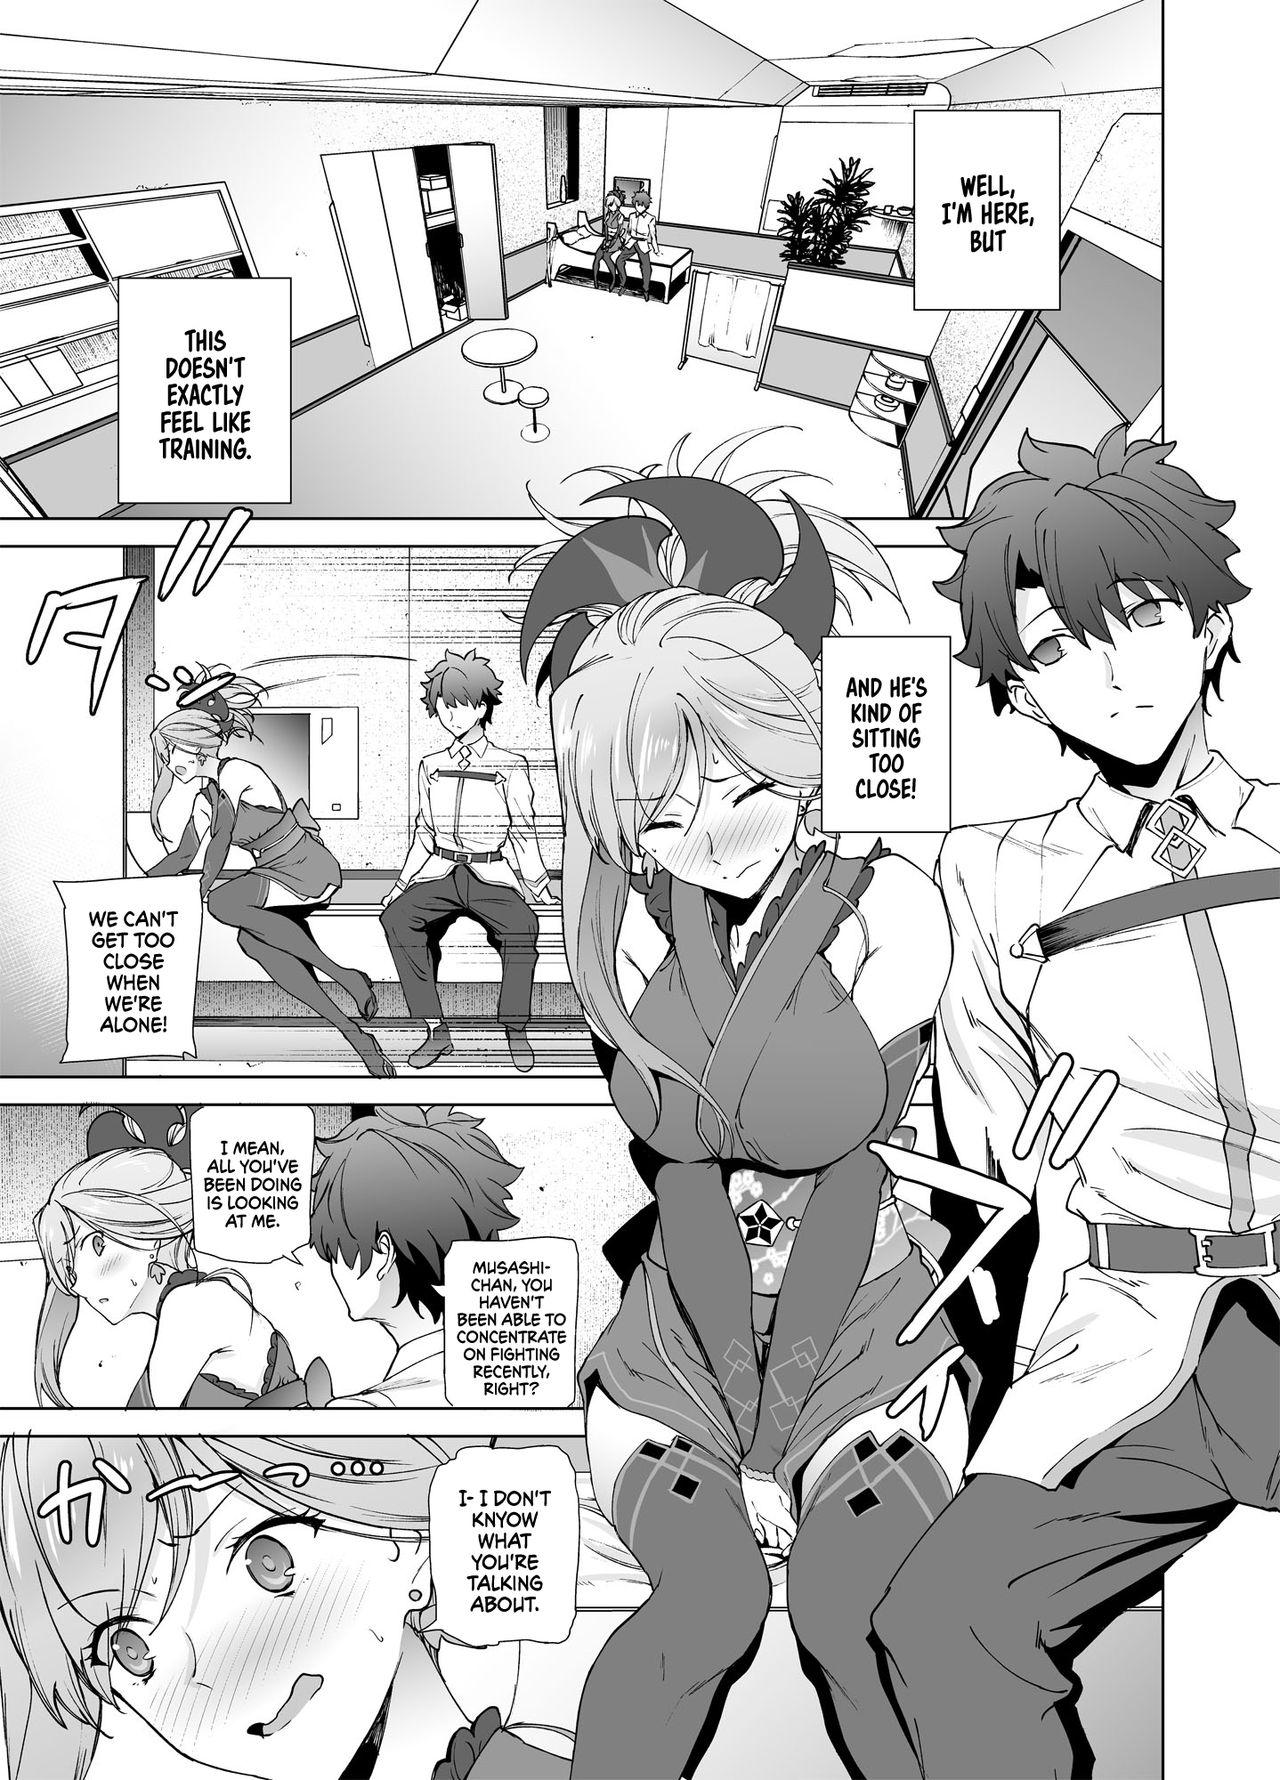 Adorable [EXTENDED PART (Endo Yoshiki)] Musashi-chan, Mada da yo. | It's not over yet, Musashi-chan. (Fate/Grand Order) [English] [EHCOVE] [Digital] - Fate grand order Made - Page 4